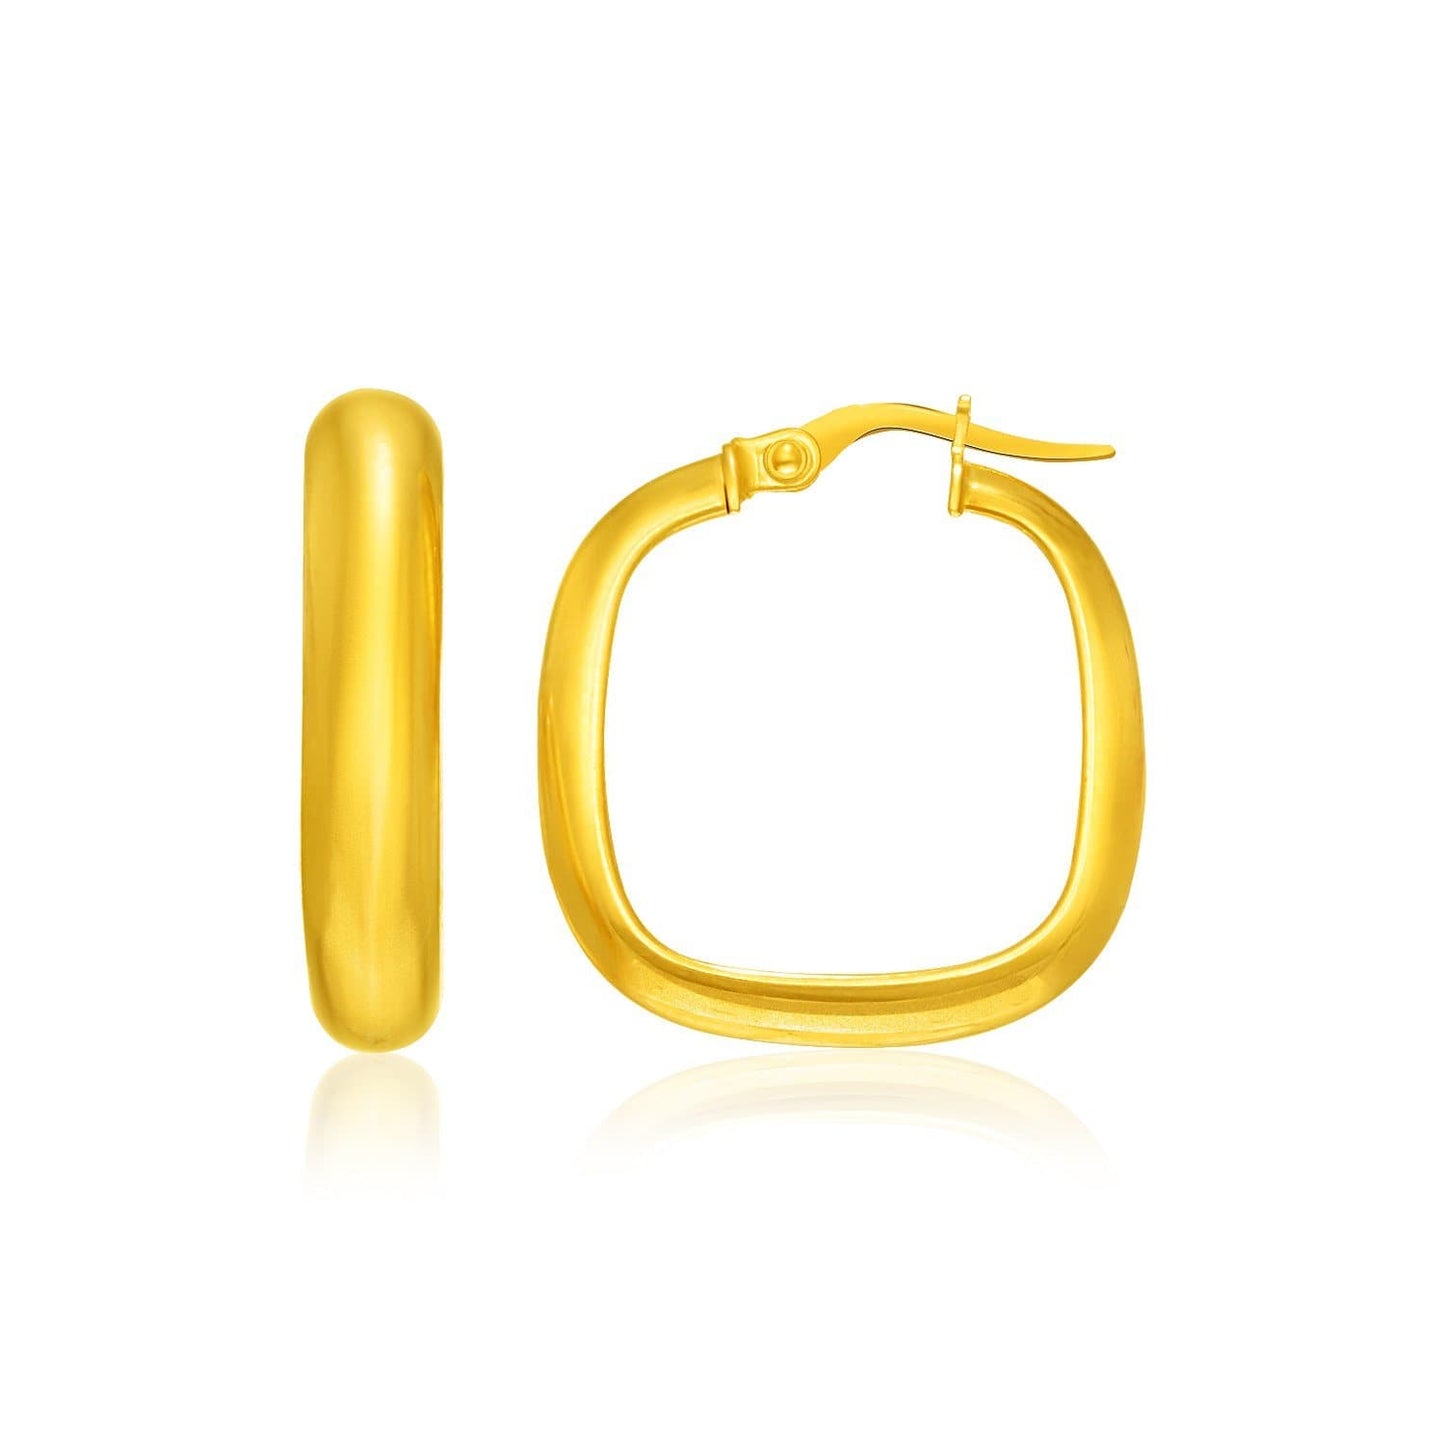 14k Yellow Gold Hoop Earrings with a Square Style